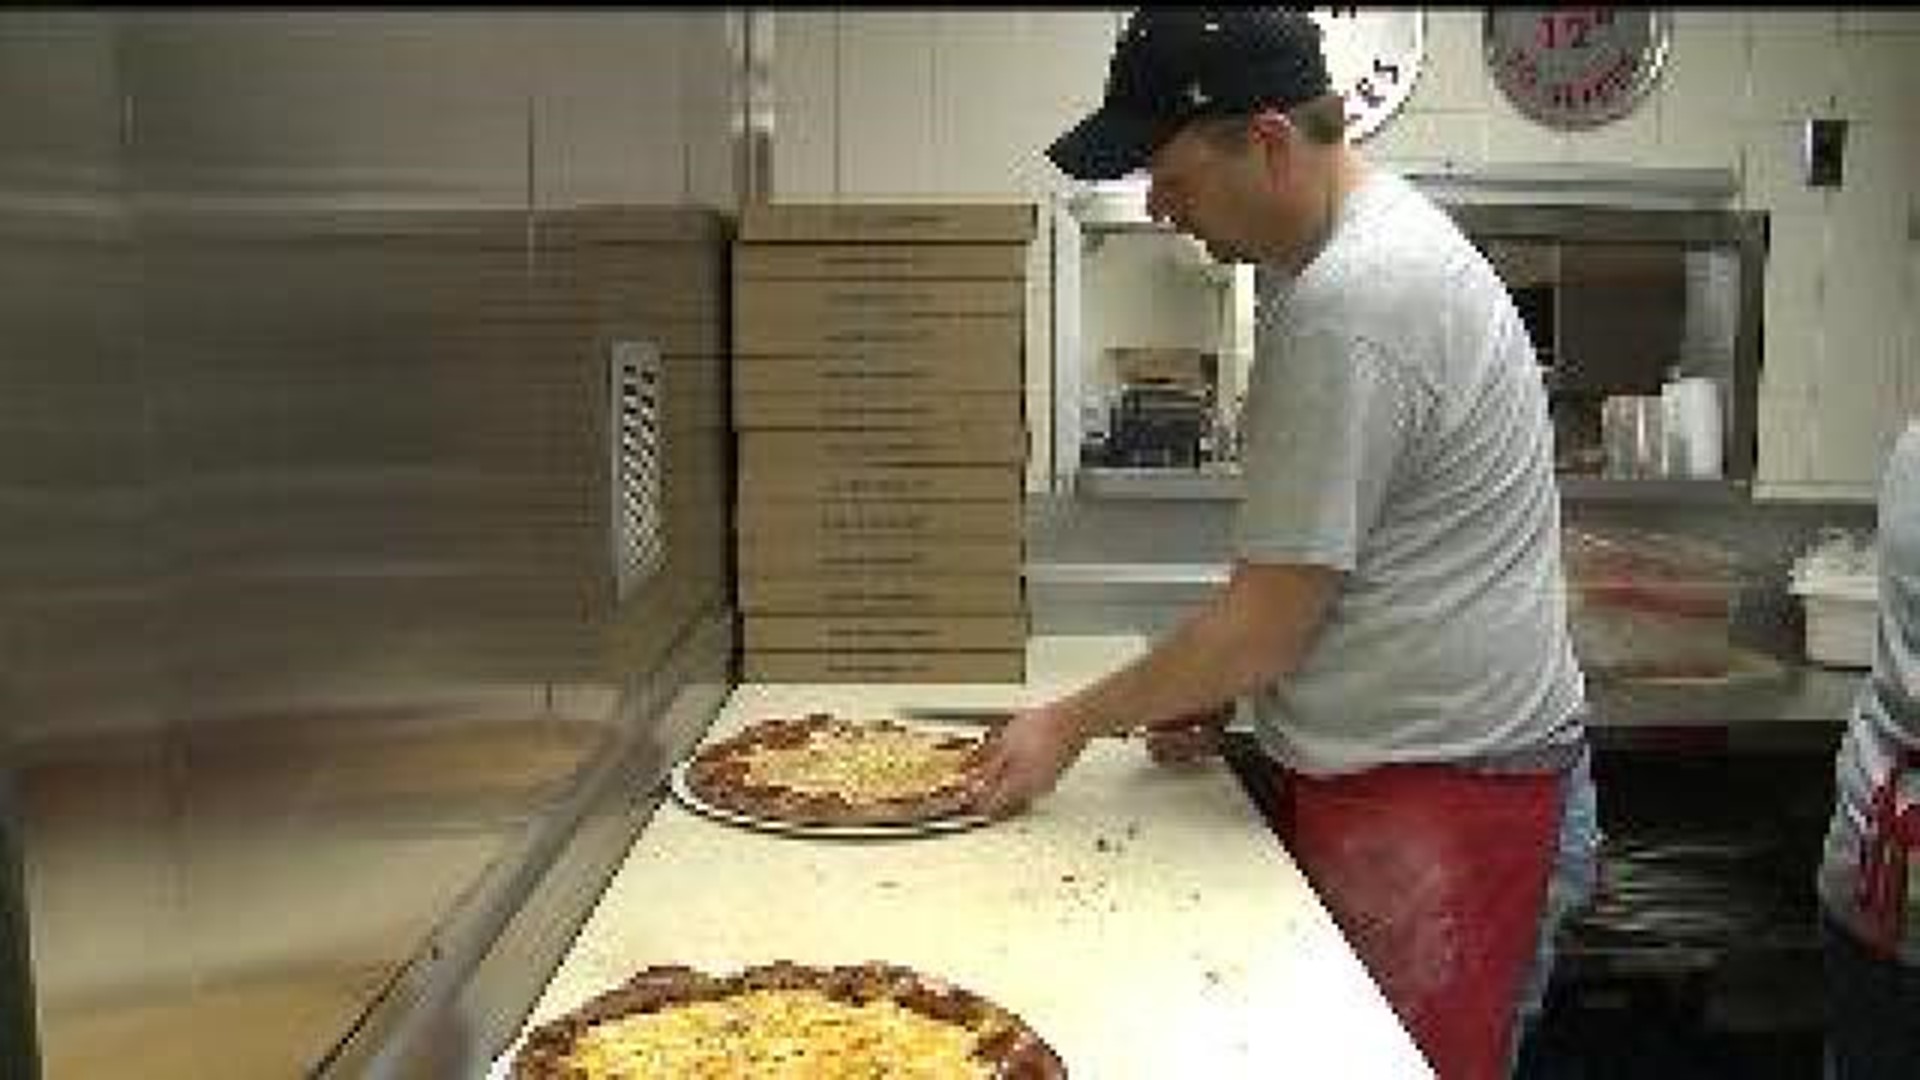 Halloween: One of the busiest nights for pizza places